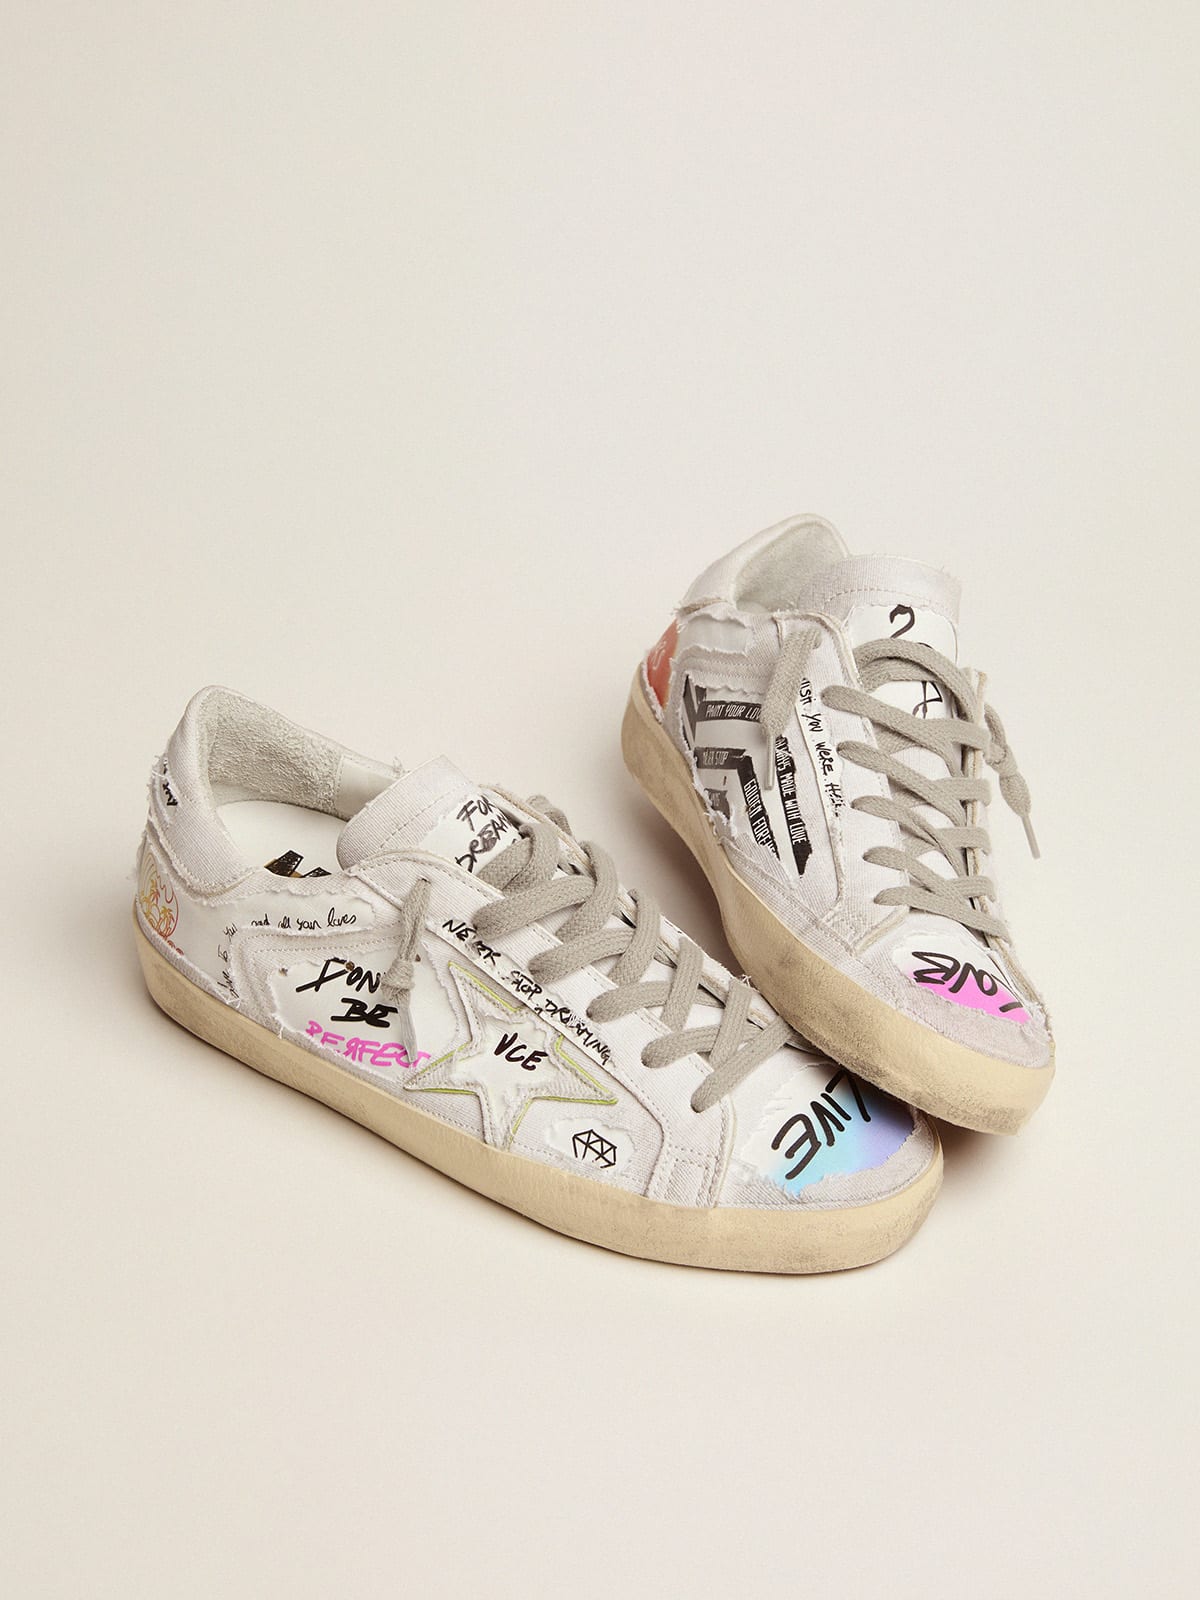 Golden Goose - Super-Star Dream Maker sneakers in white color with reverse construction and hidden multicolor details in 